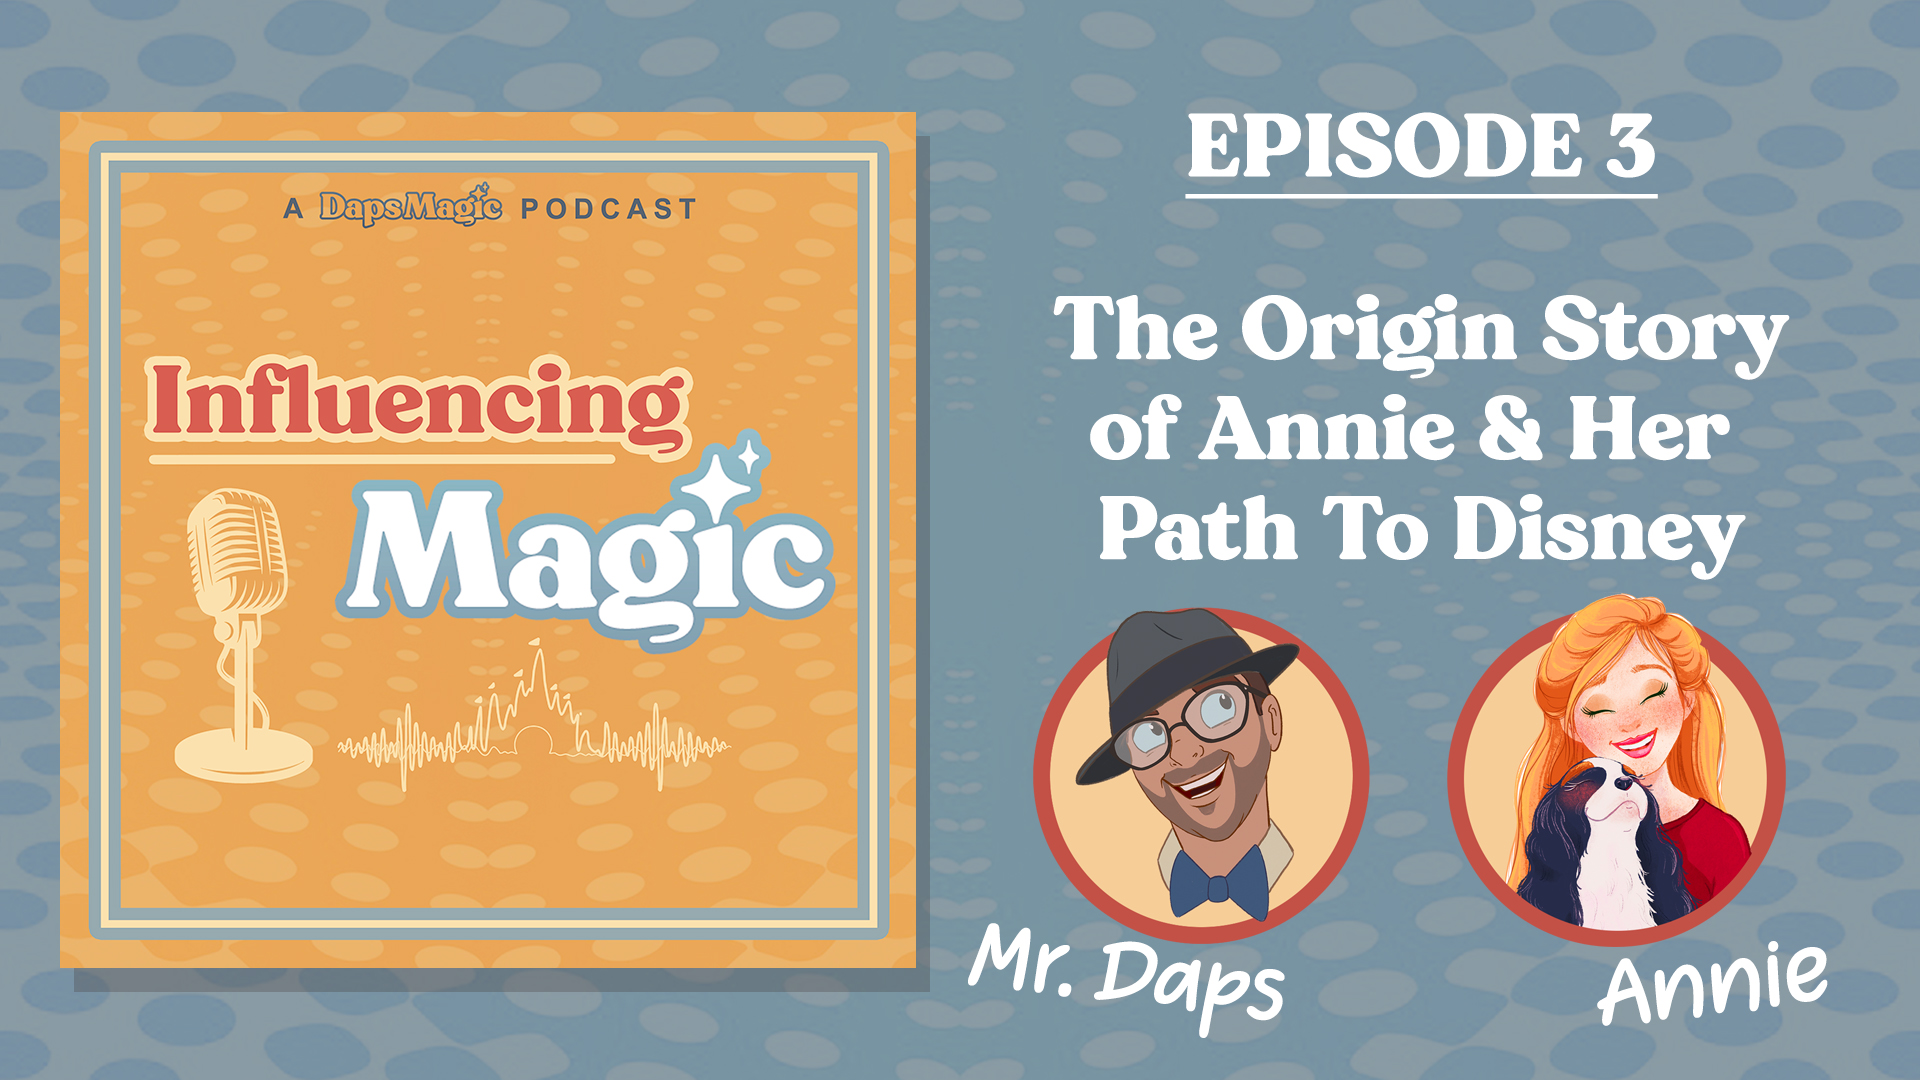 Episode 3: The Origin Story of Annie & Her Path to Disney